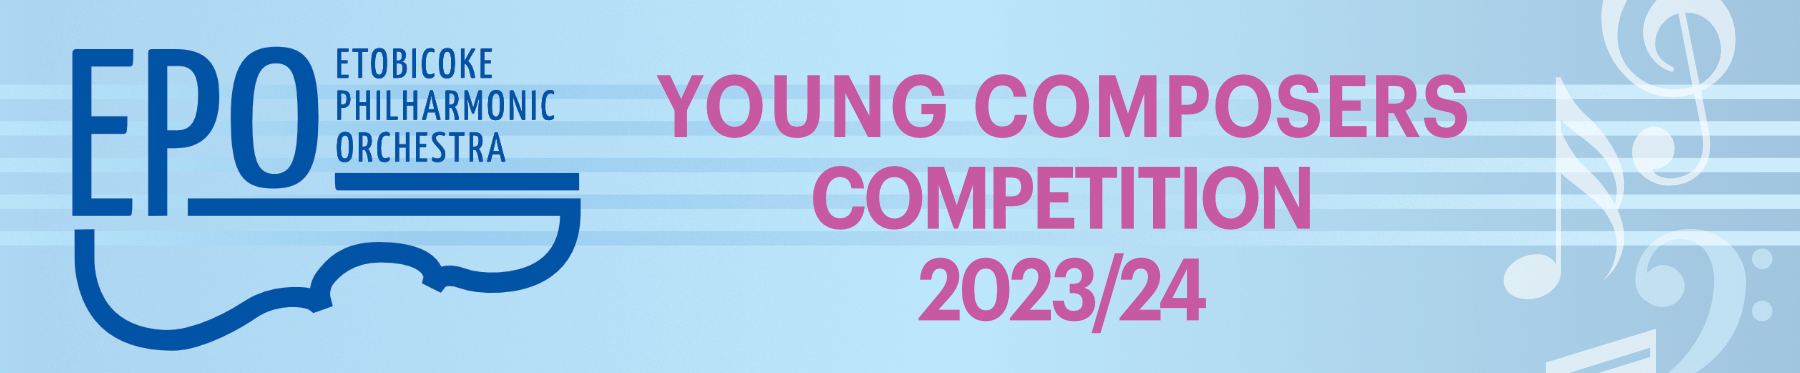 Young Composers Competition 2023/24